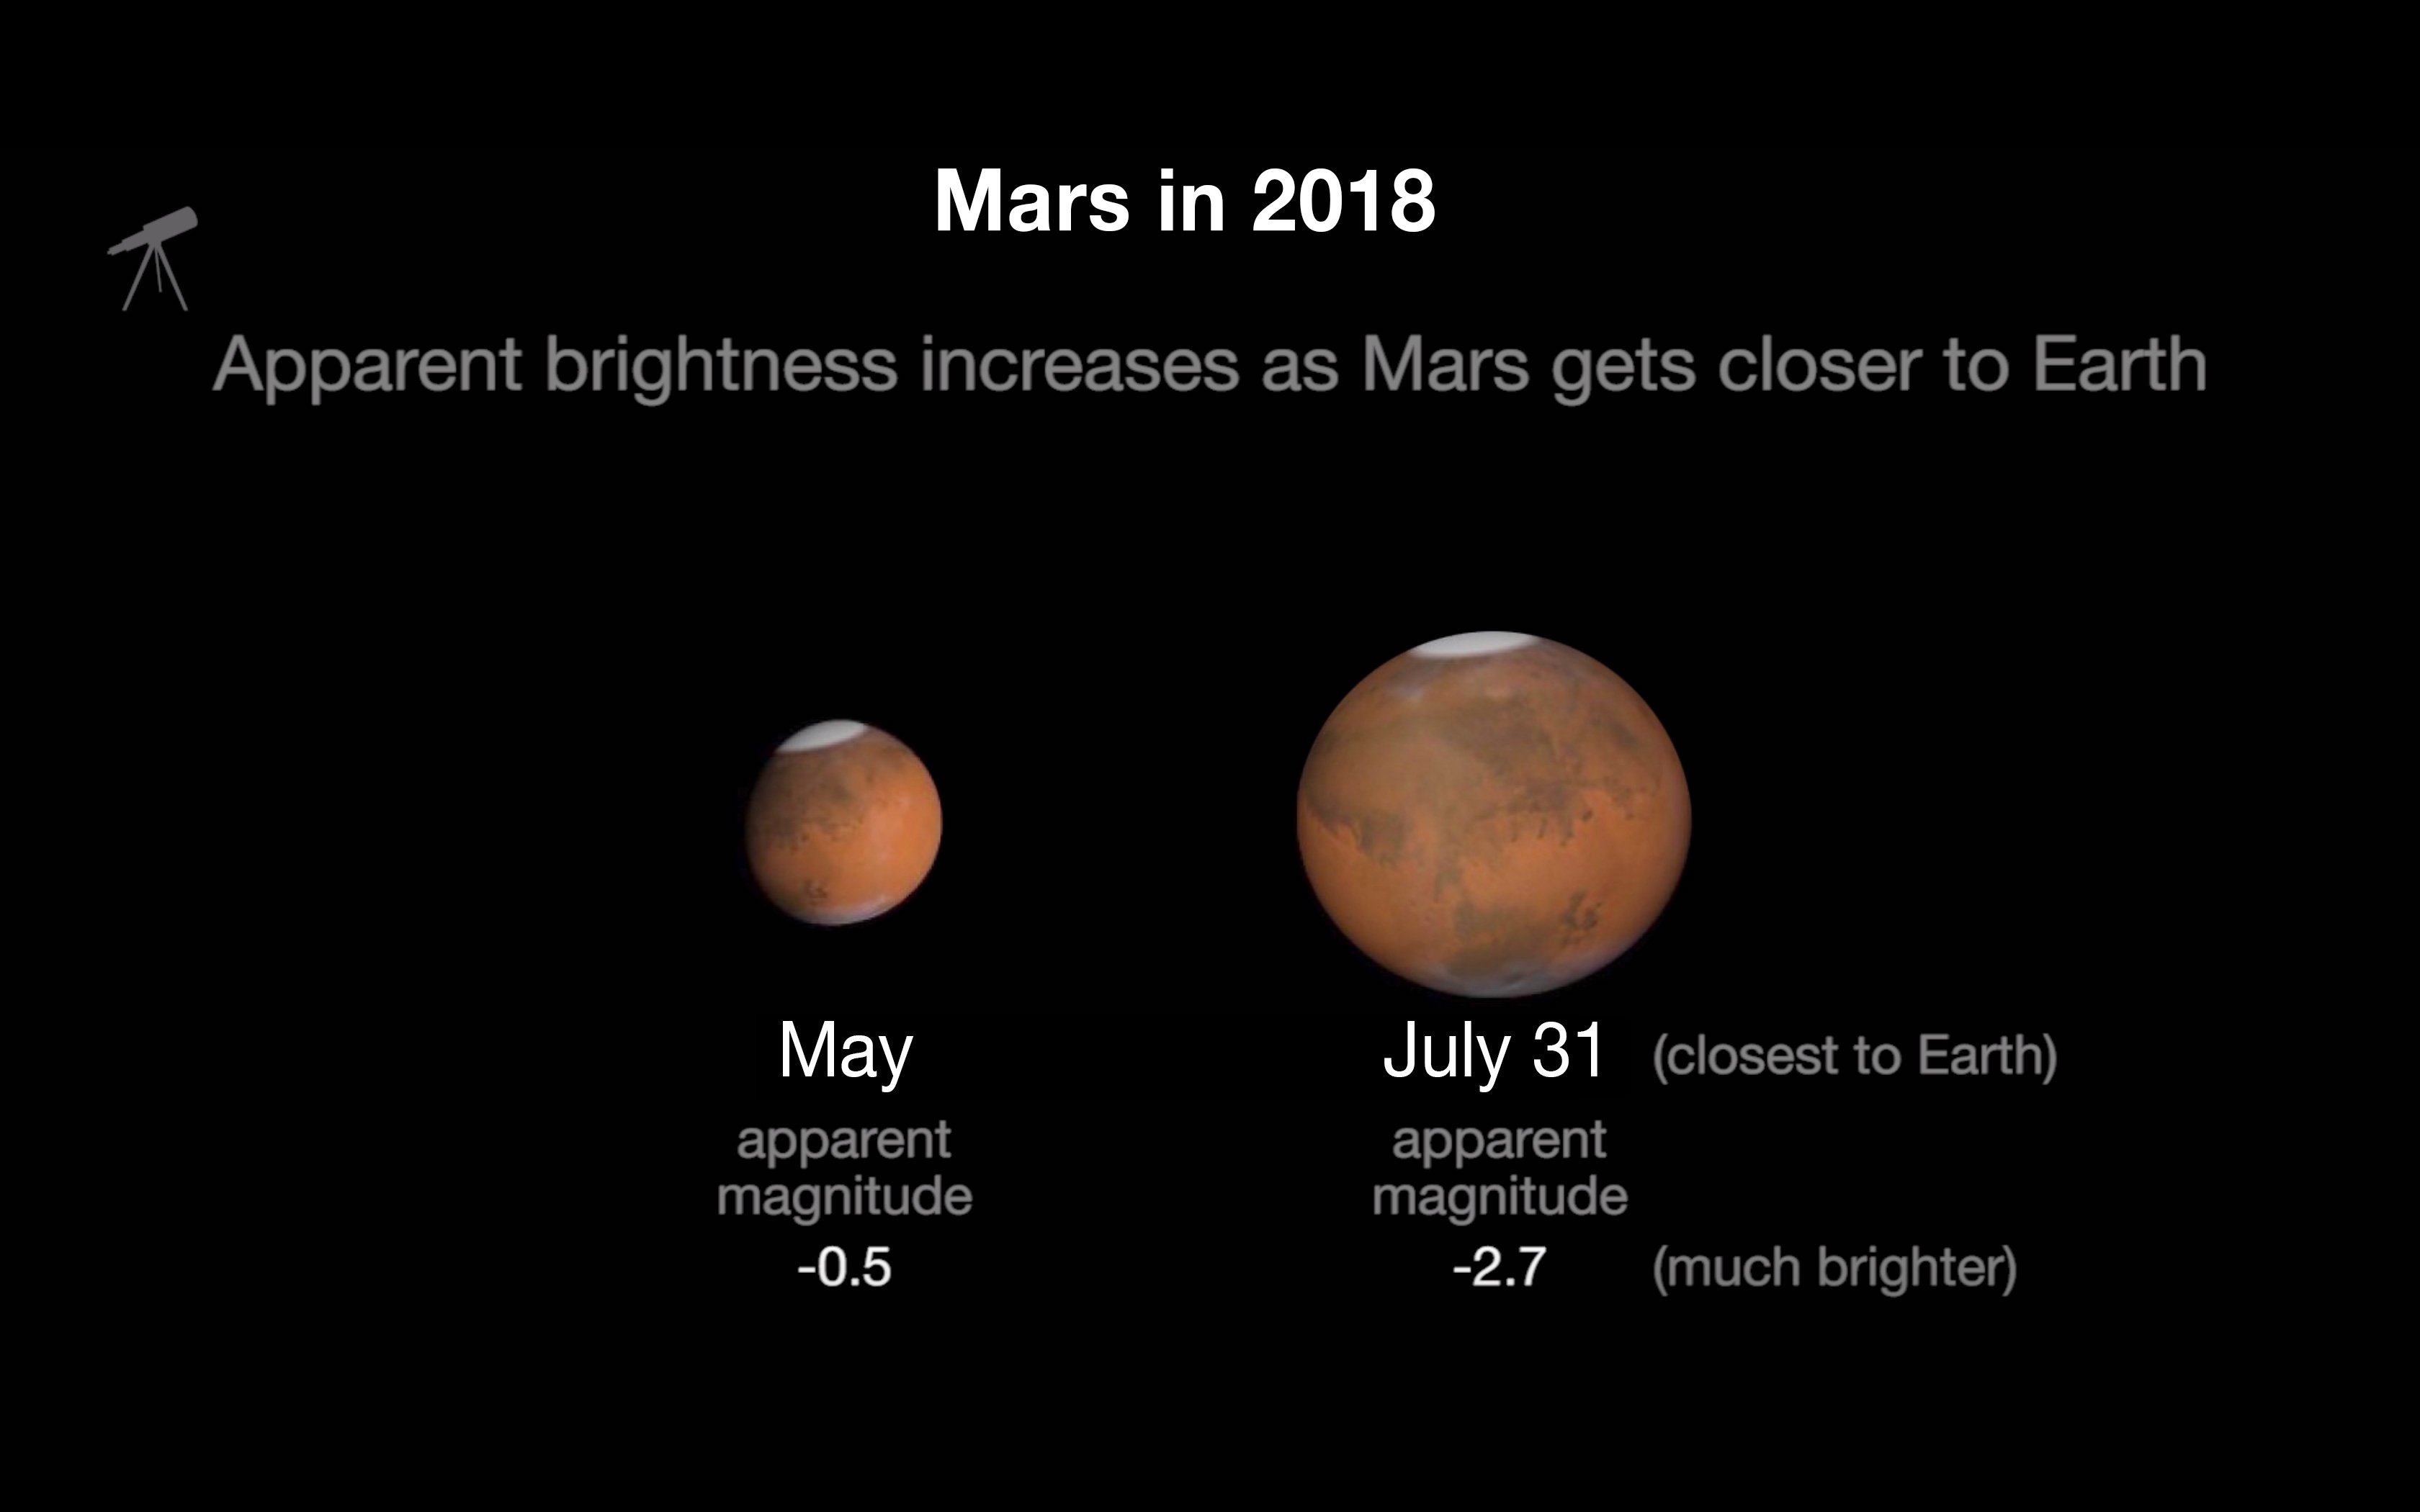 In 2018, Mars will appear brightest from July 27 to July 30. Its closest approach to Earth is July 31.